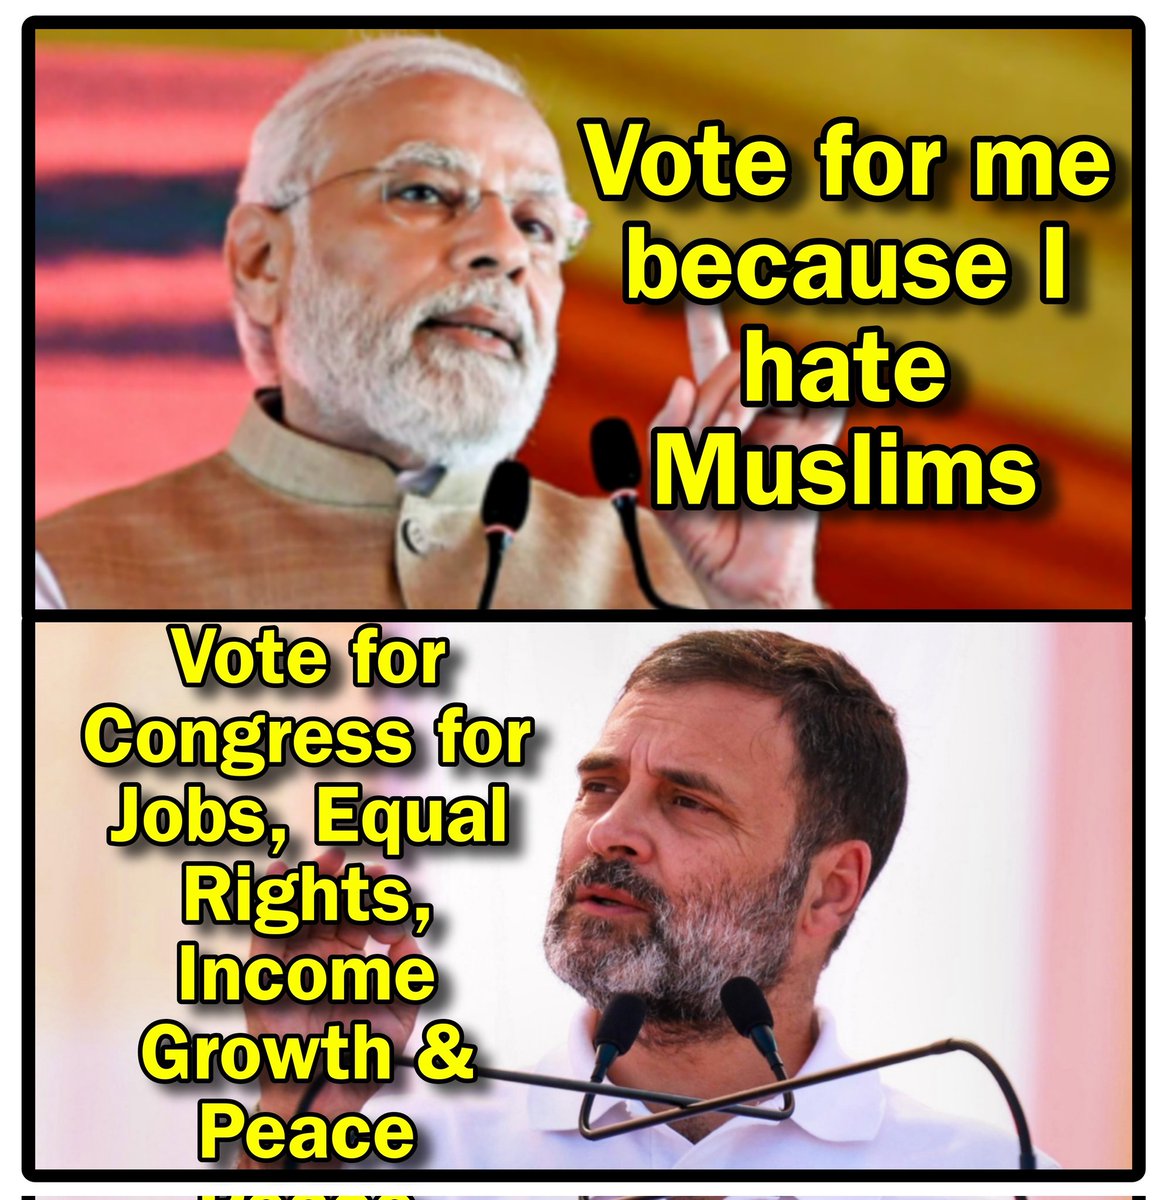 Modi: Vote for me because I hate Muslims. Rahul Gandhi: Vote for Congress for Jobs, Equal Rights, Income Growth & Peace. The choice is simple.